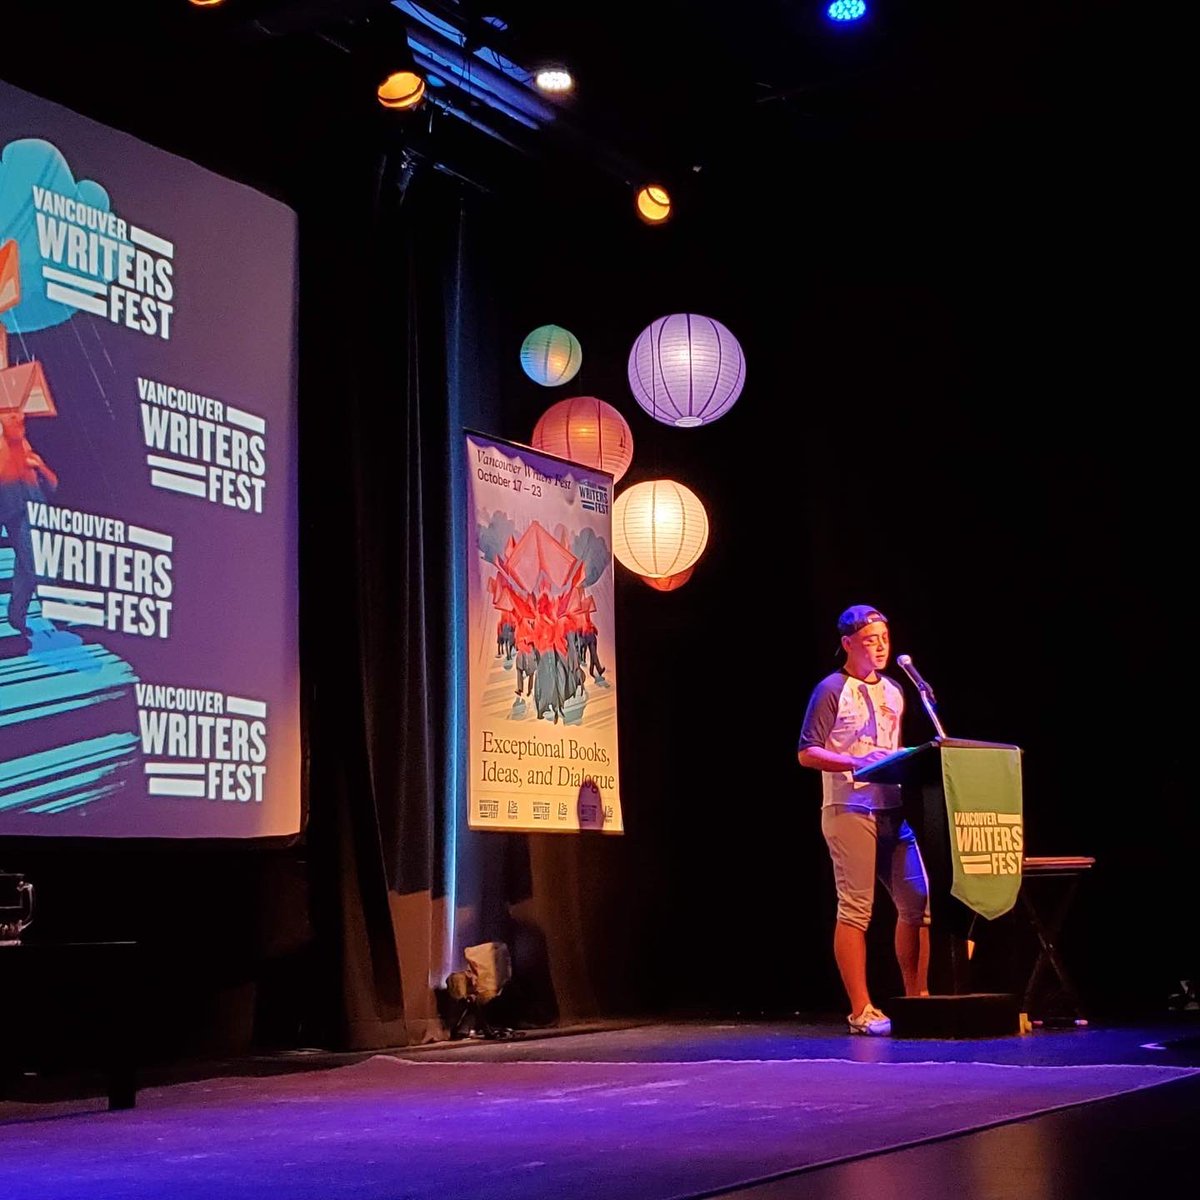 Friday was big for me at @VanWritersFest Shared a few laughs on stage with Booker Prize winner @Doug_D_Stuart Got to know my agent @rachelletofsky over beer and oysters. Celebrated a book launch while wearing makeup and the tightest pants. 10/10 day.